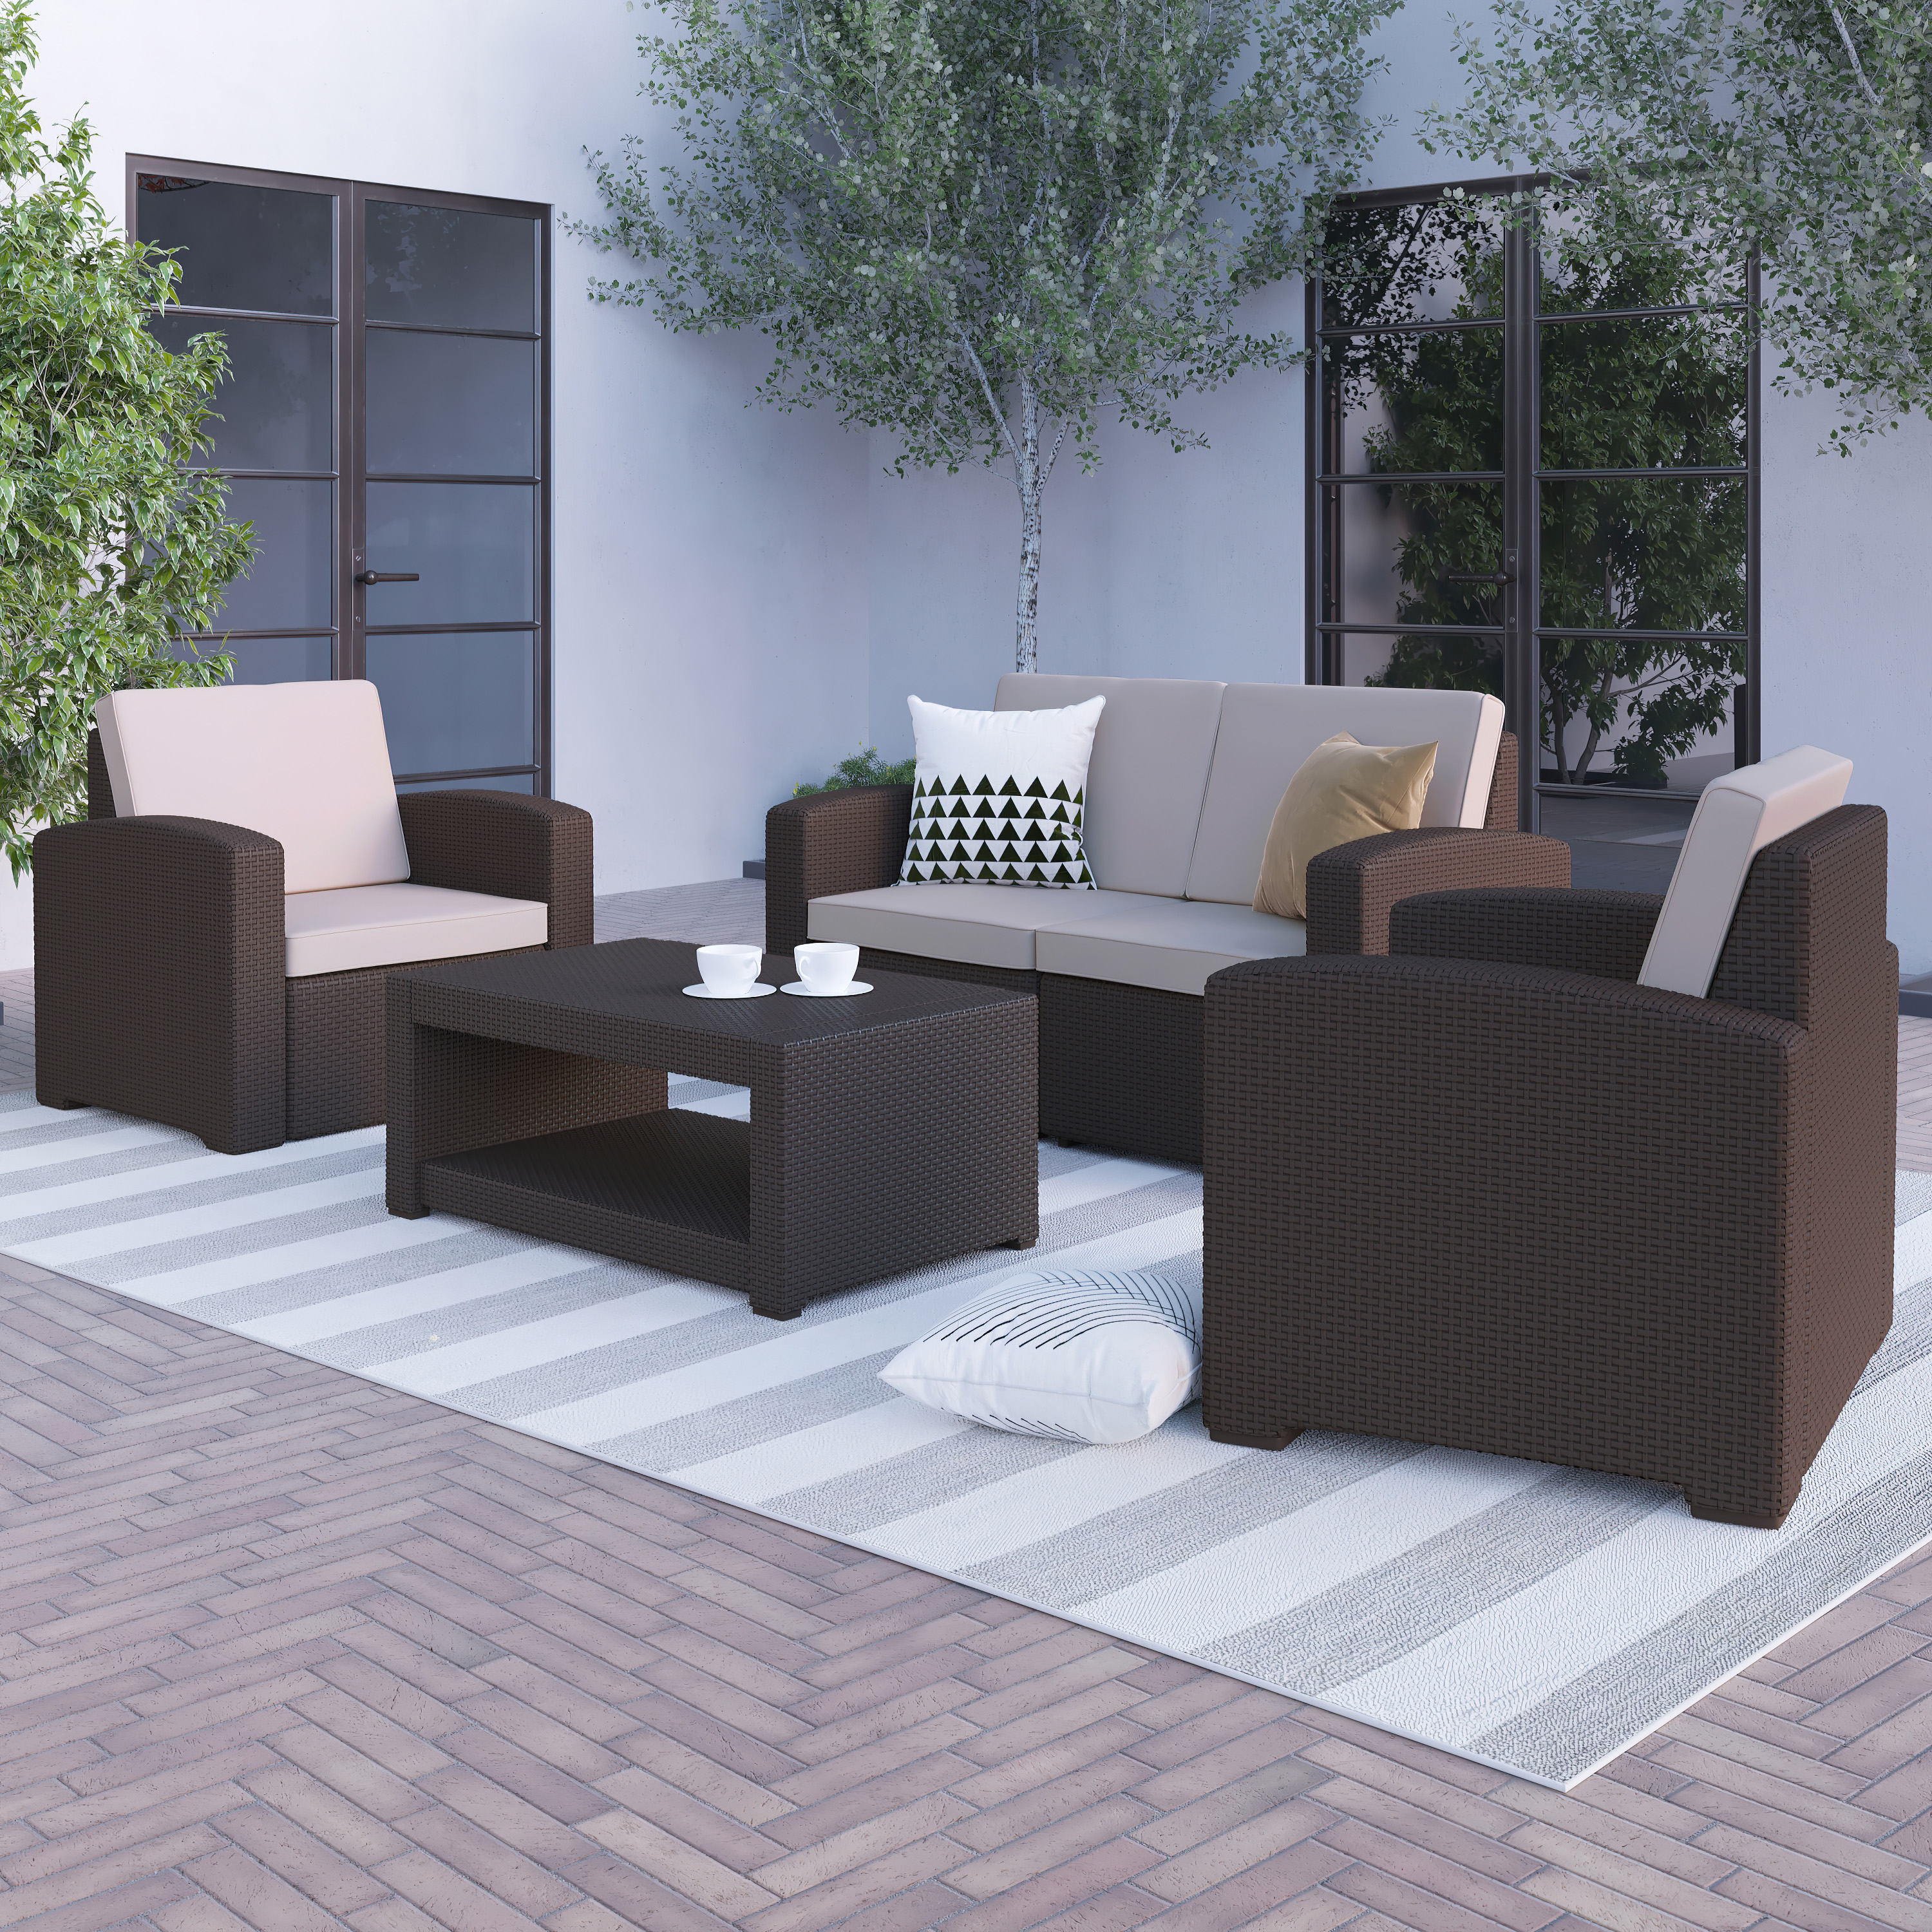 Flash Furniture Seneca 4 Piece Outdoor Faux Rattan Chair, Loveseat and Table Set in Seneca Chocolate Brown - image 4 of 5